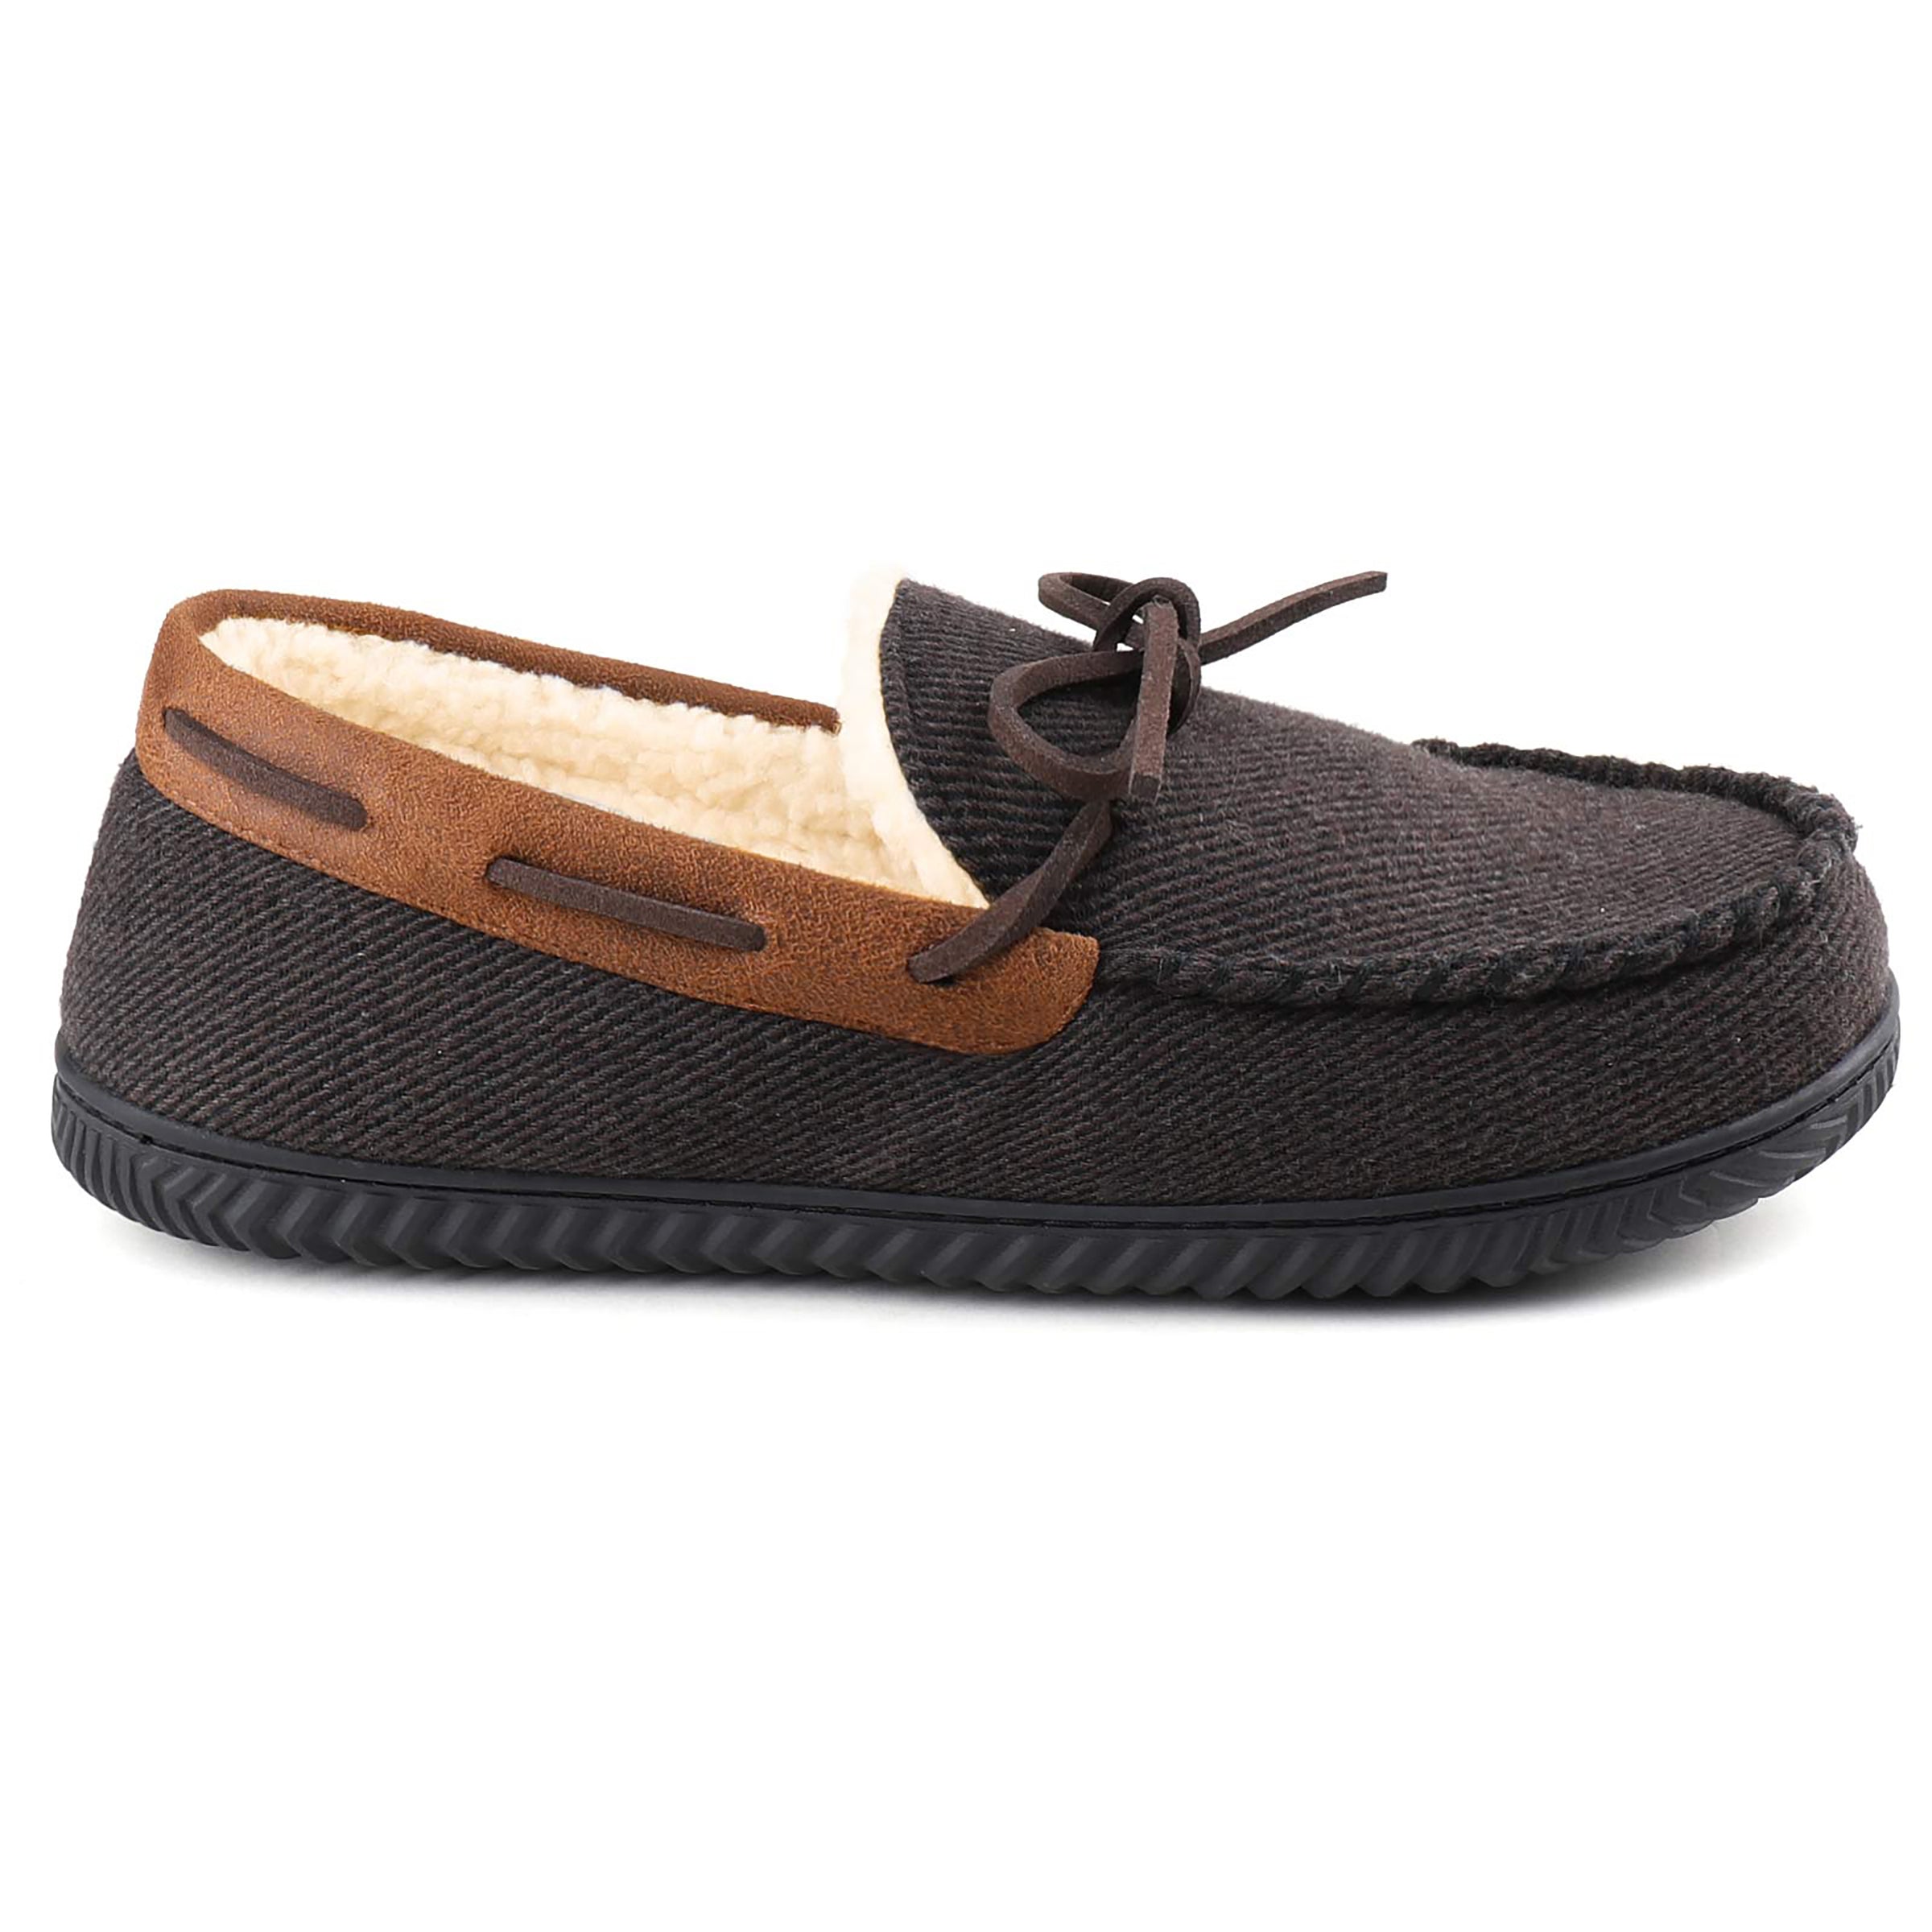 NEW Mens Felt Moccasin Slippers Size 10 Slip On Loafers Flat Casual Shoes  Indoor - Đức An Phát